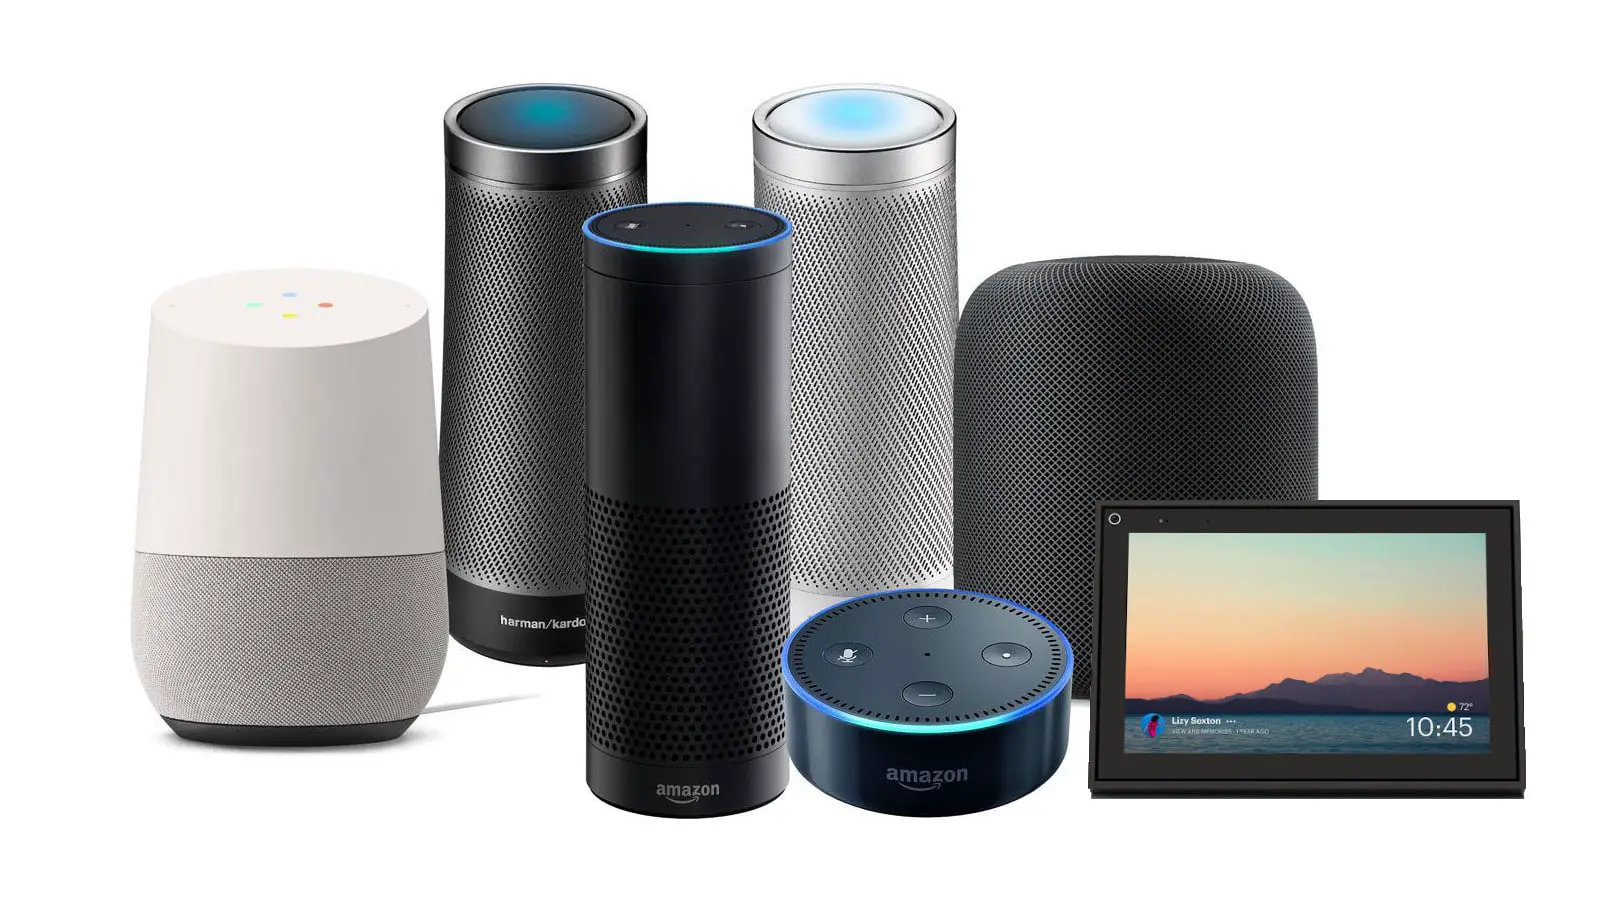 59 percent of Smart Speaker users have privacy concerns